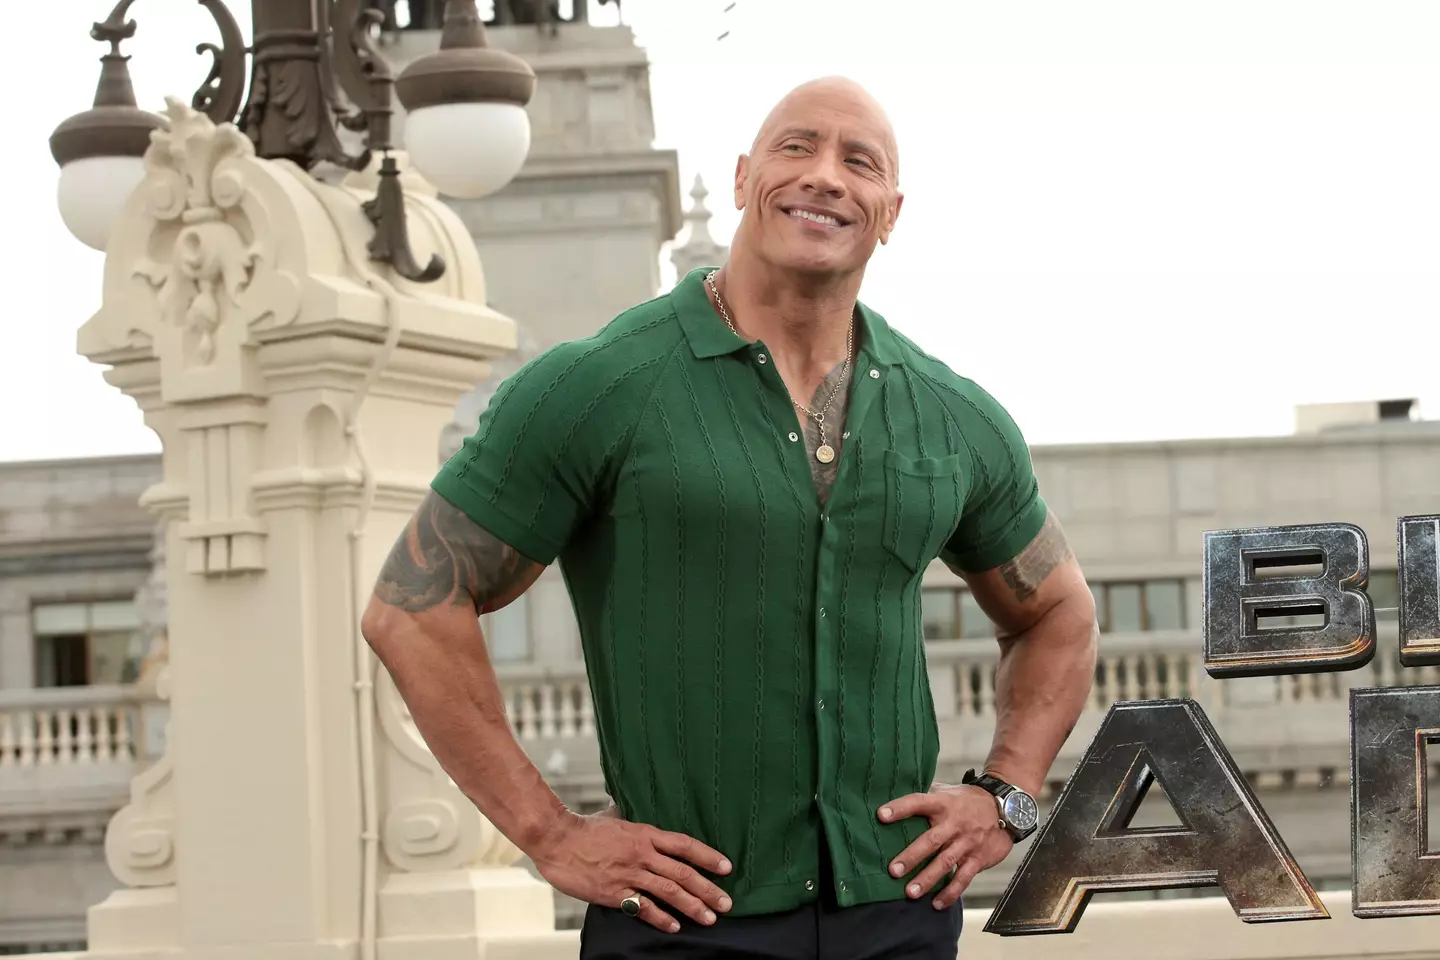 Dwayne Johnson once confessed to using steroids.